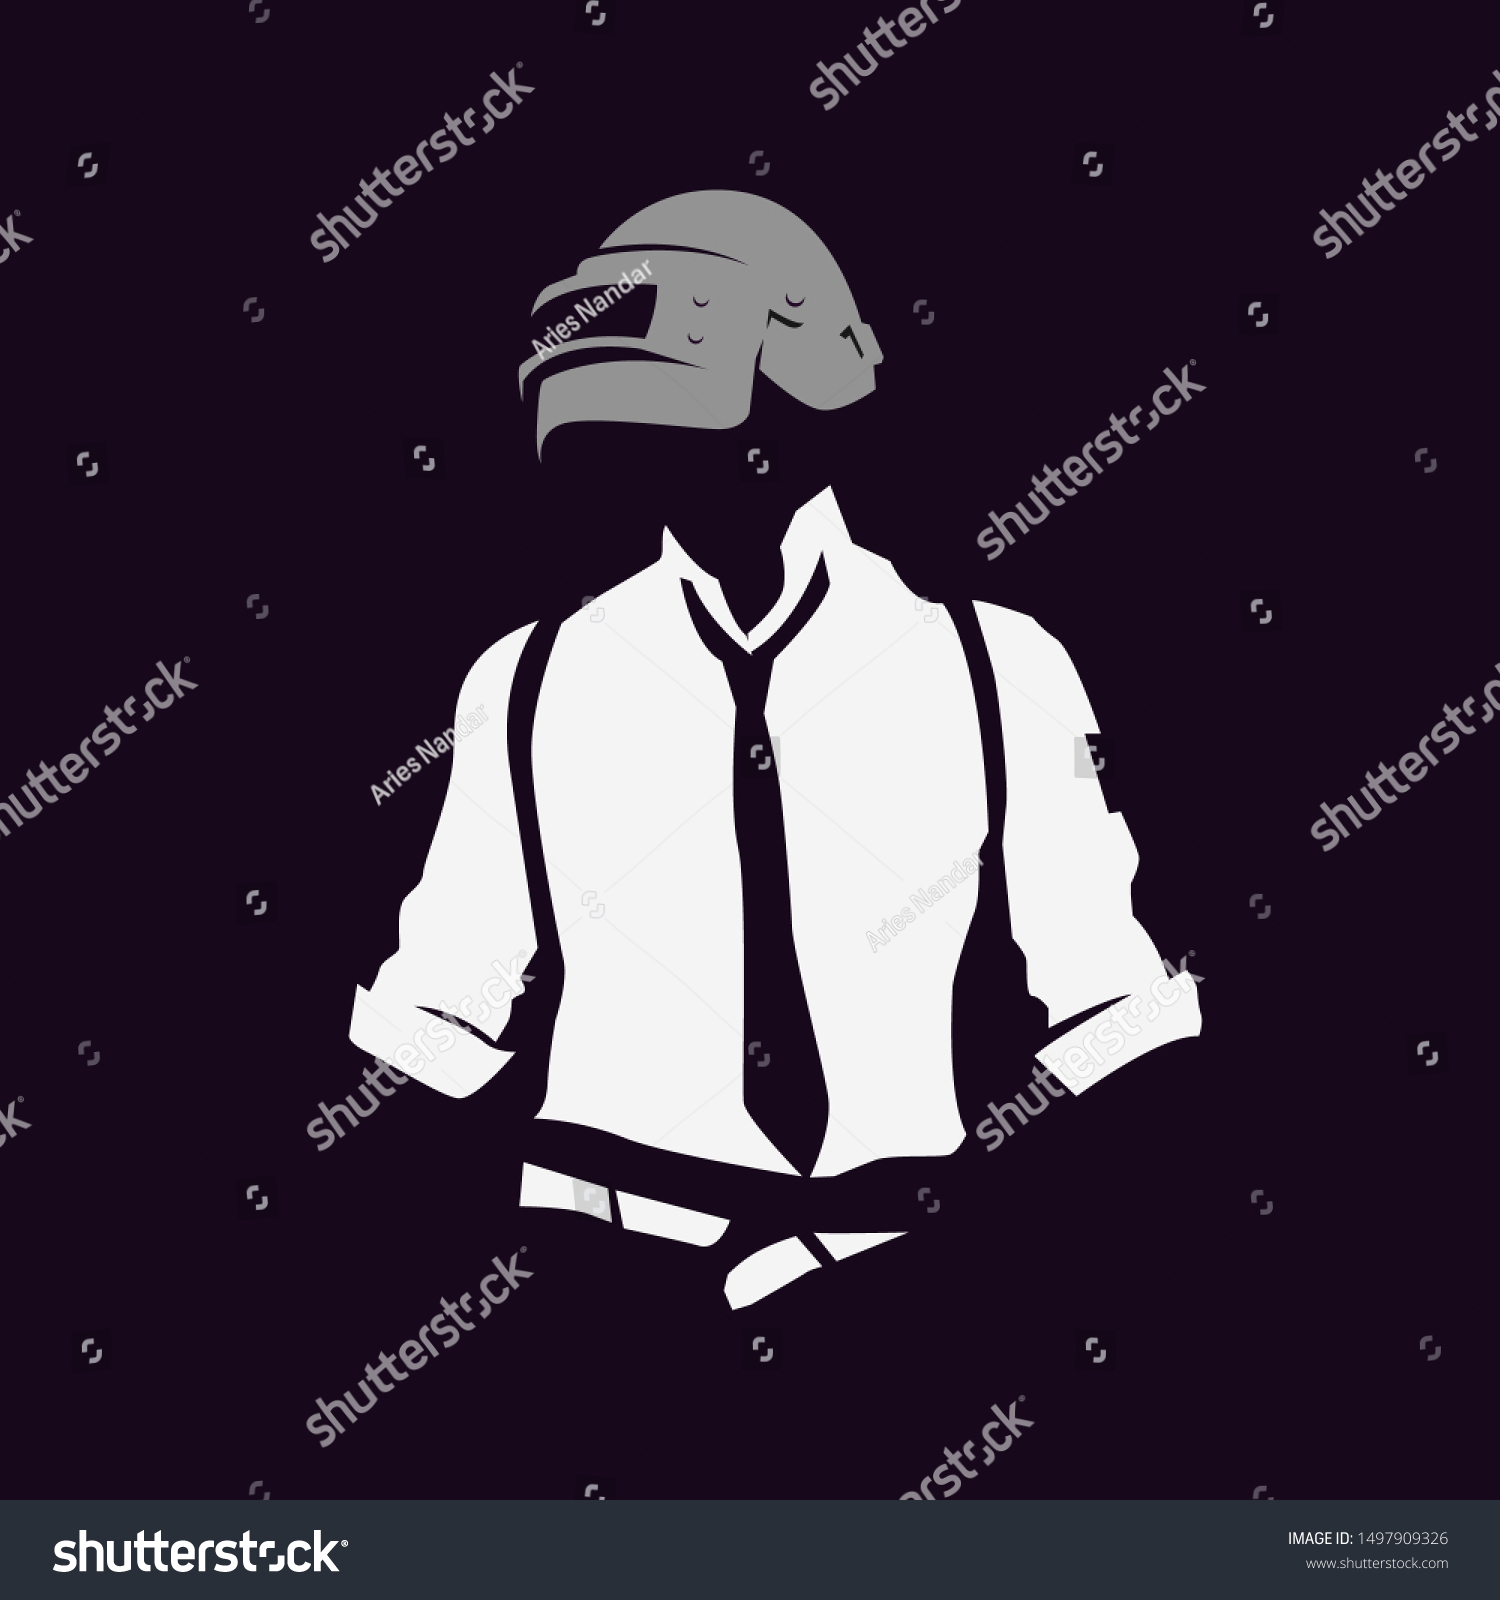 Silhouette Soldier Pubg Game Player Uniform Stock Vector Royalty Free